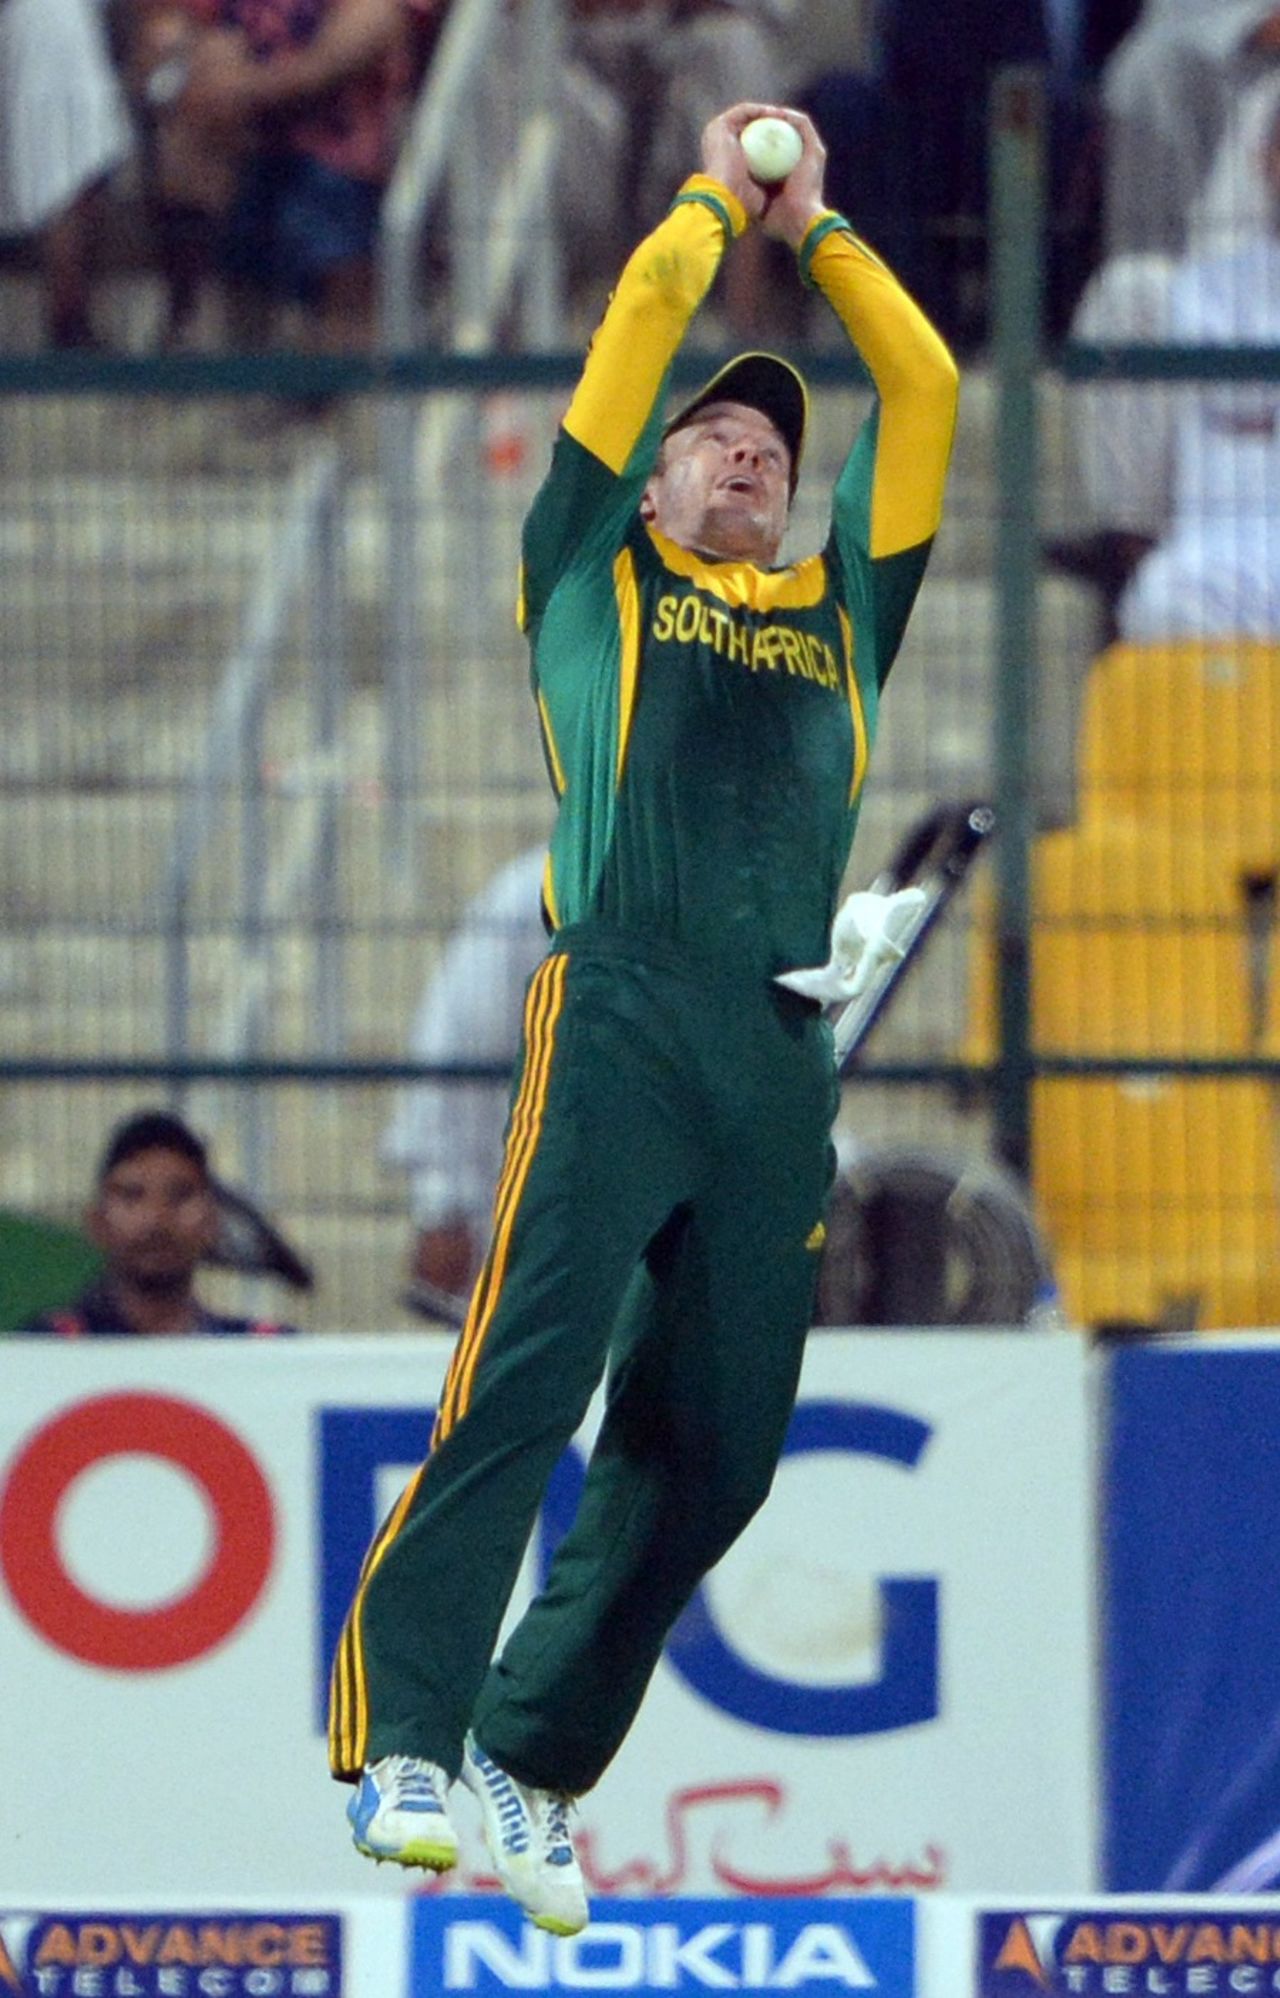 AB de Villiers jumps to successfully catch the ball, Pakistan v South Africa, 4th ODI, Abu Dhabi, November 8, 2013